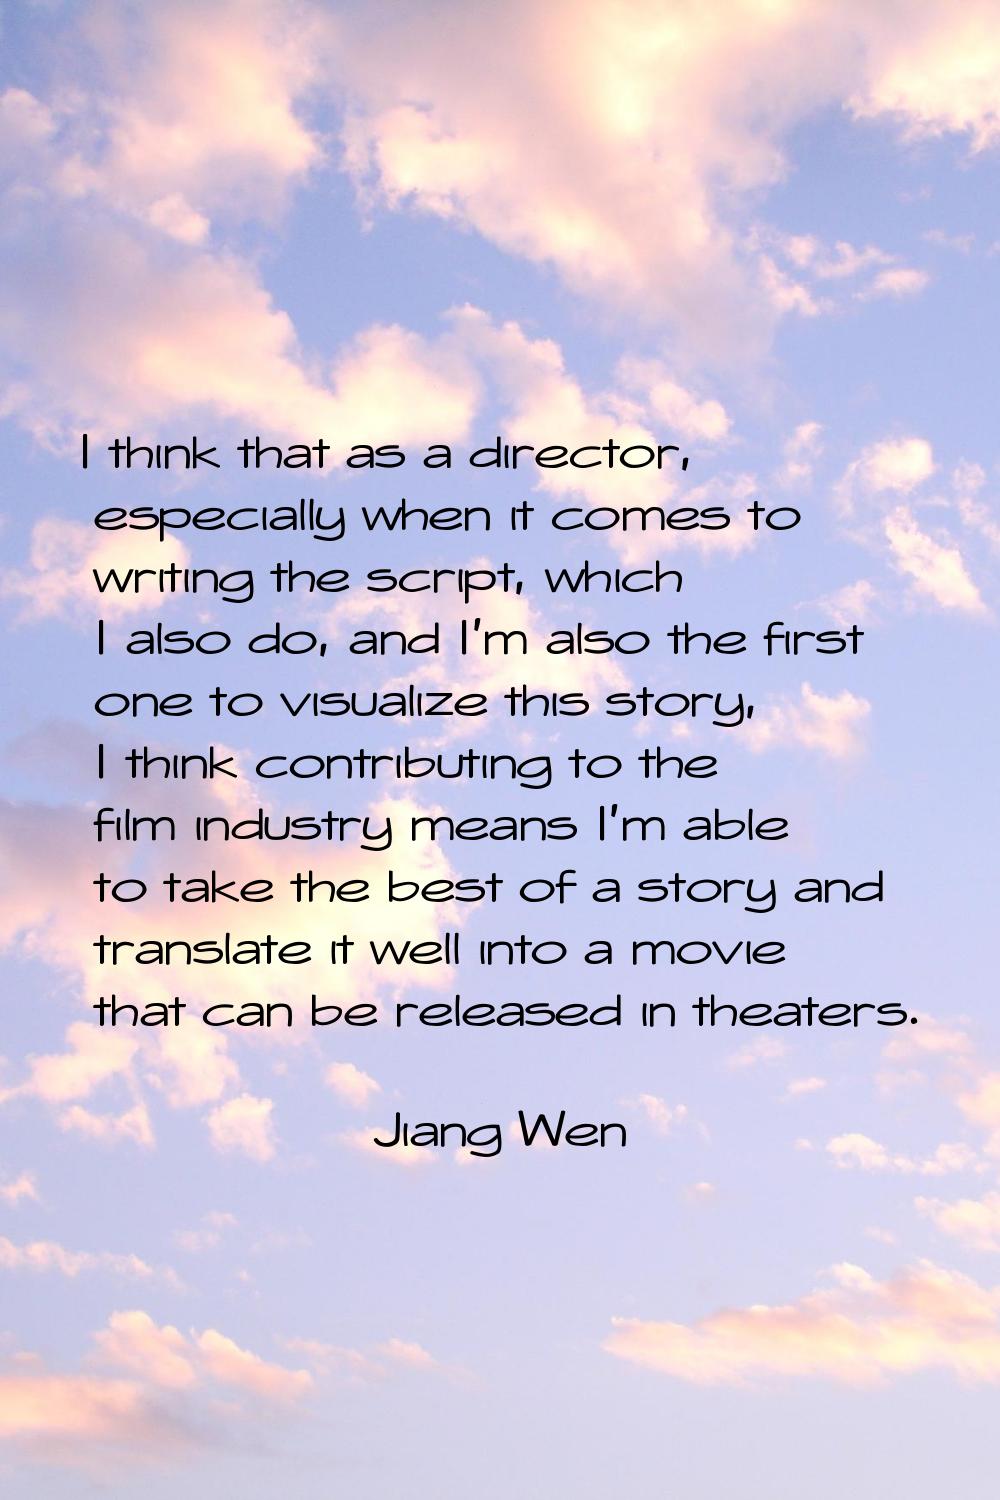 I think that as a director, especially when it comes to writing the script, which I also do, and I'